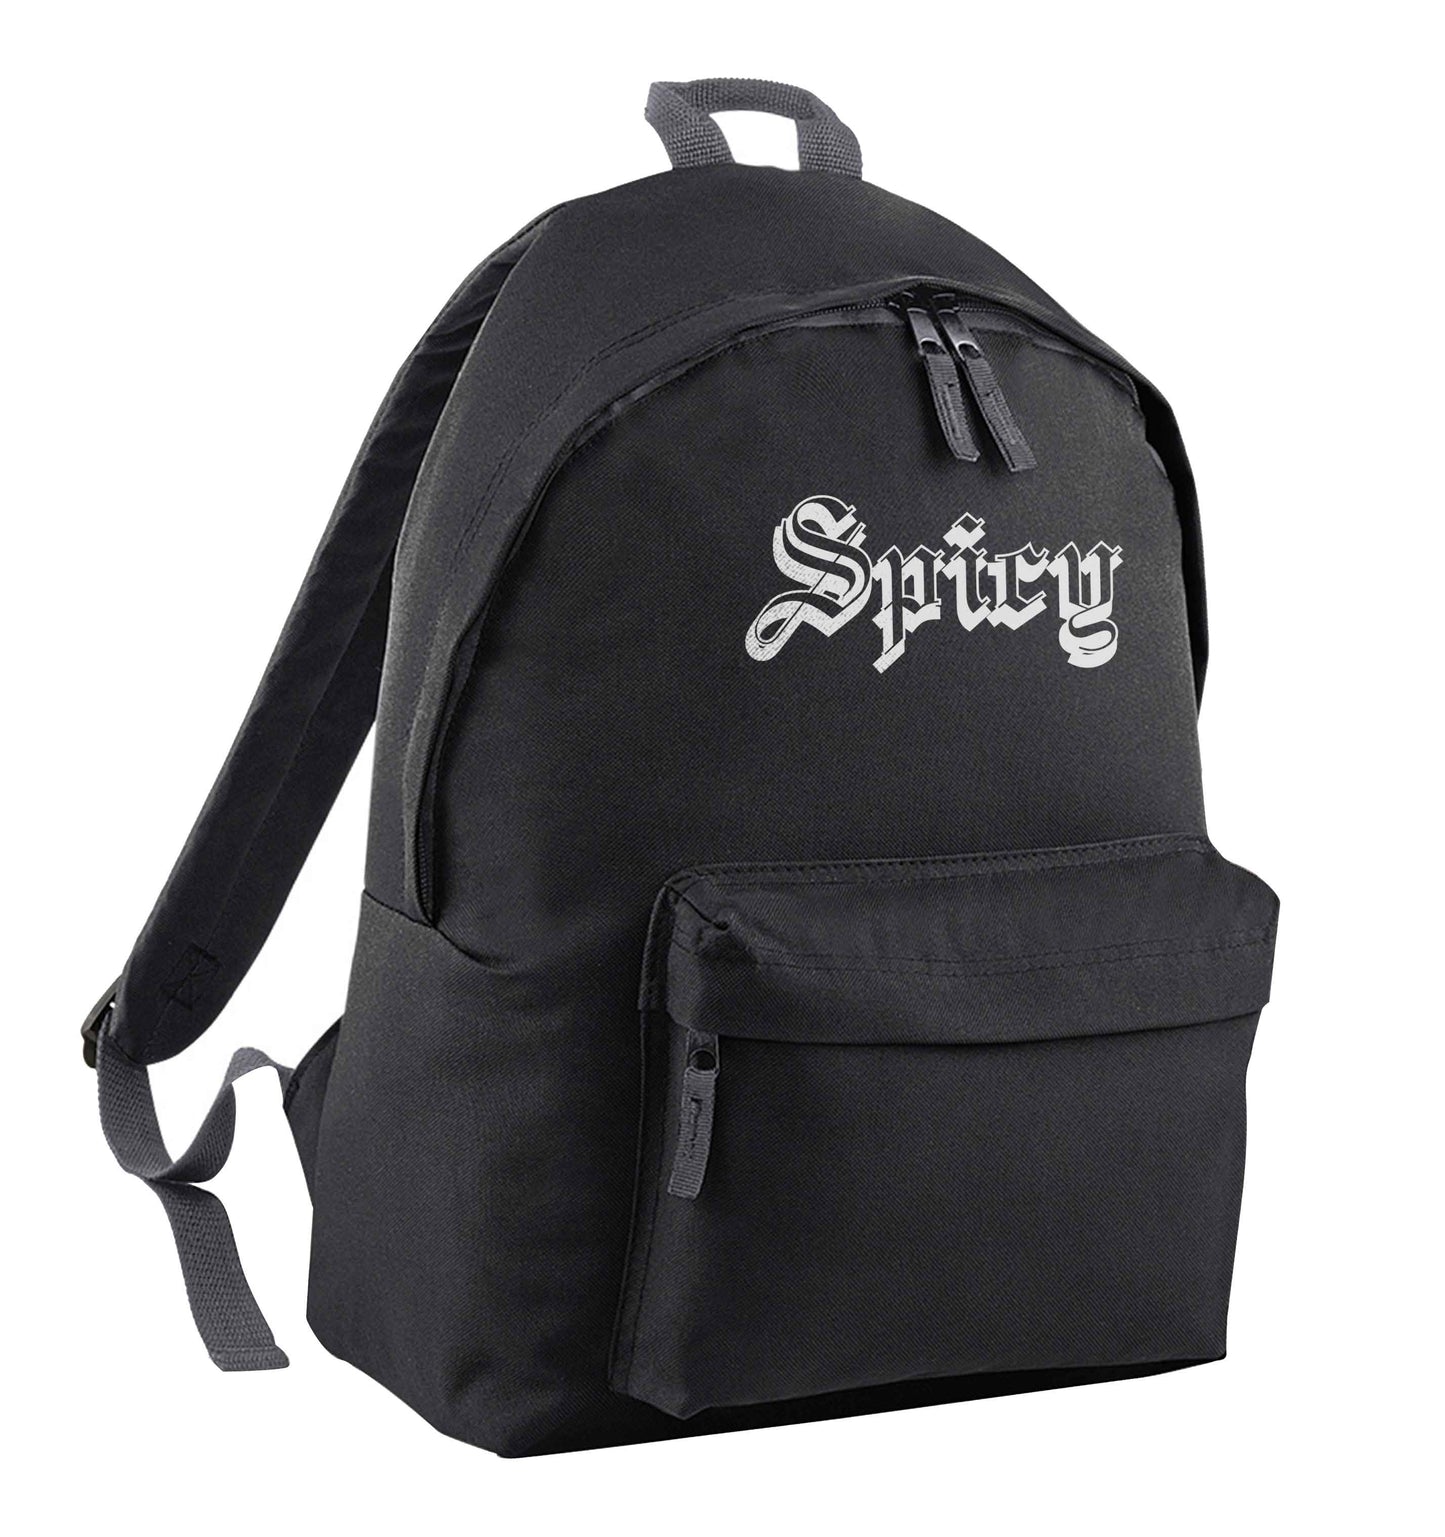 Spicy black adults backpack